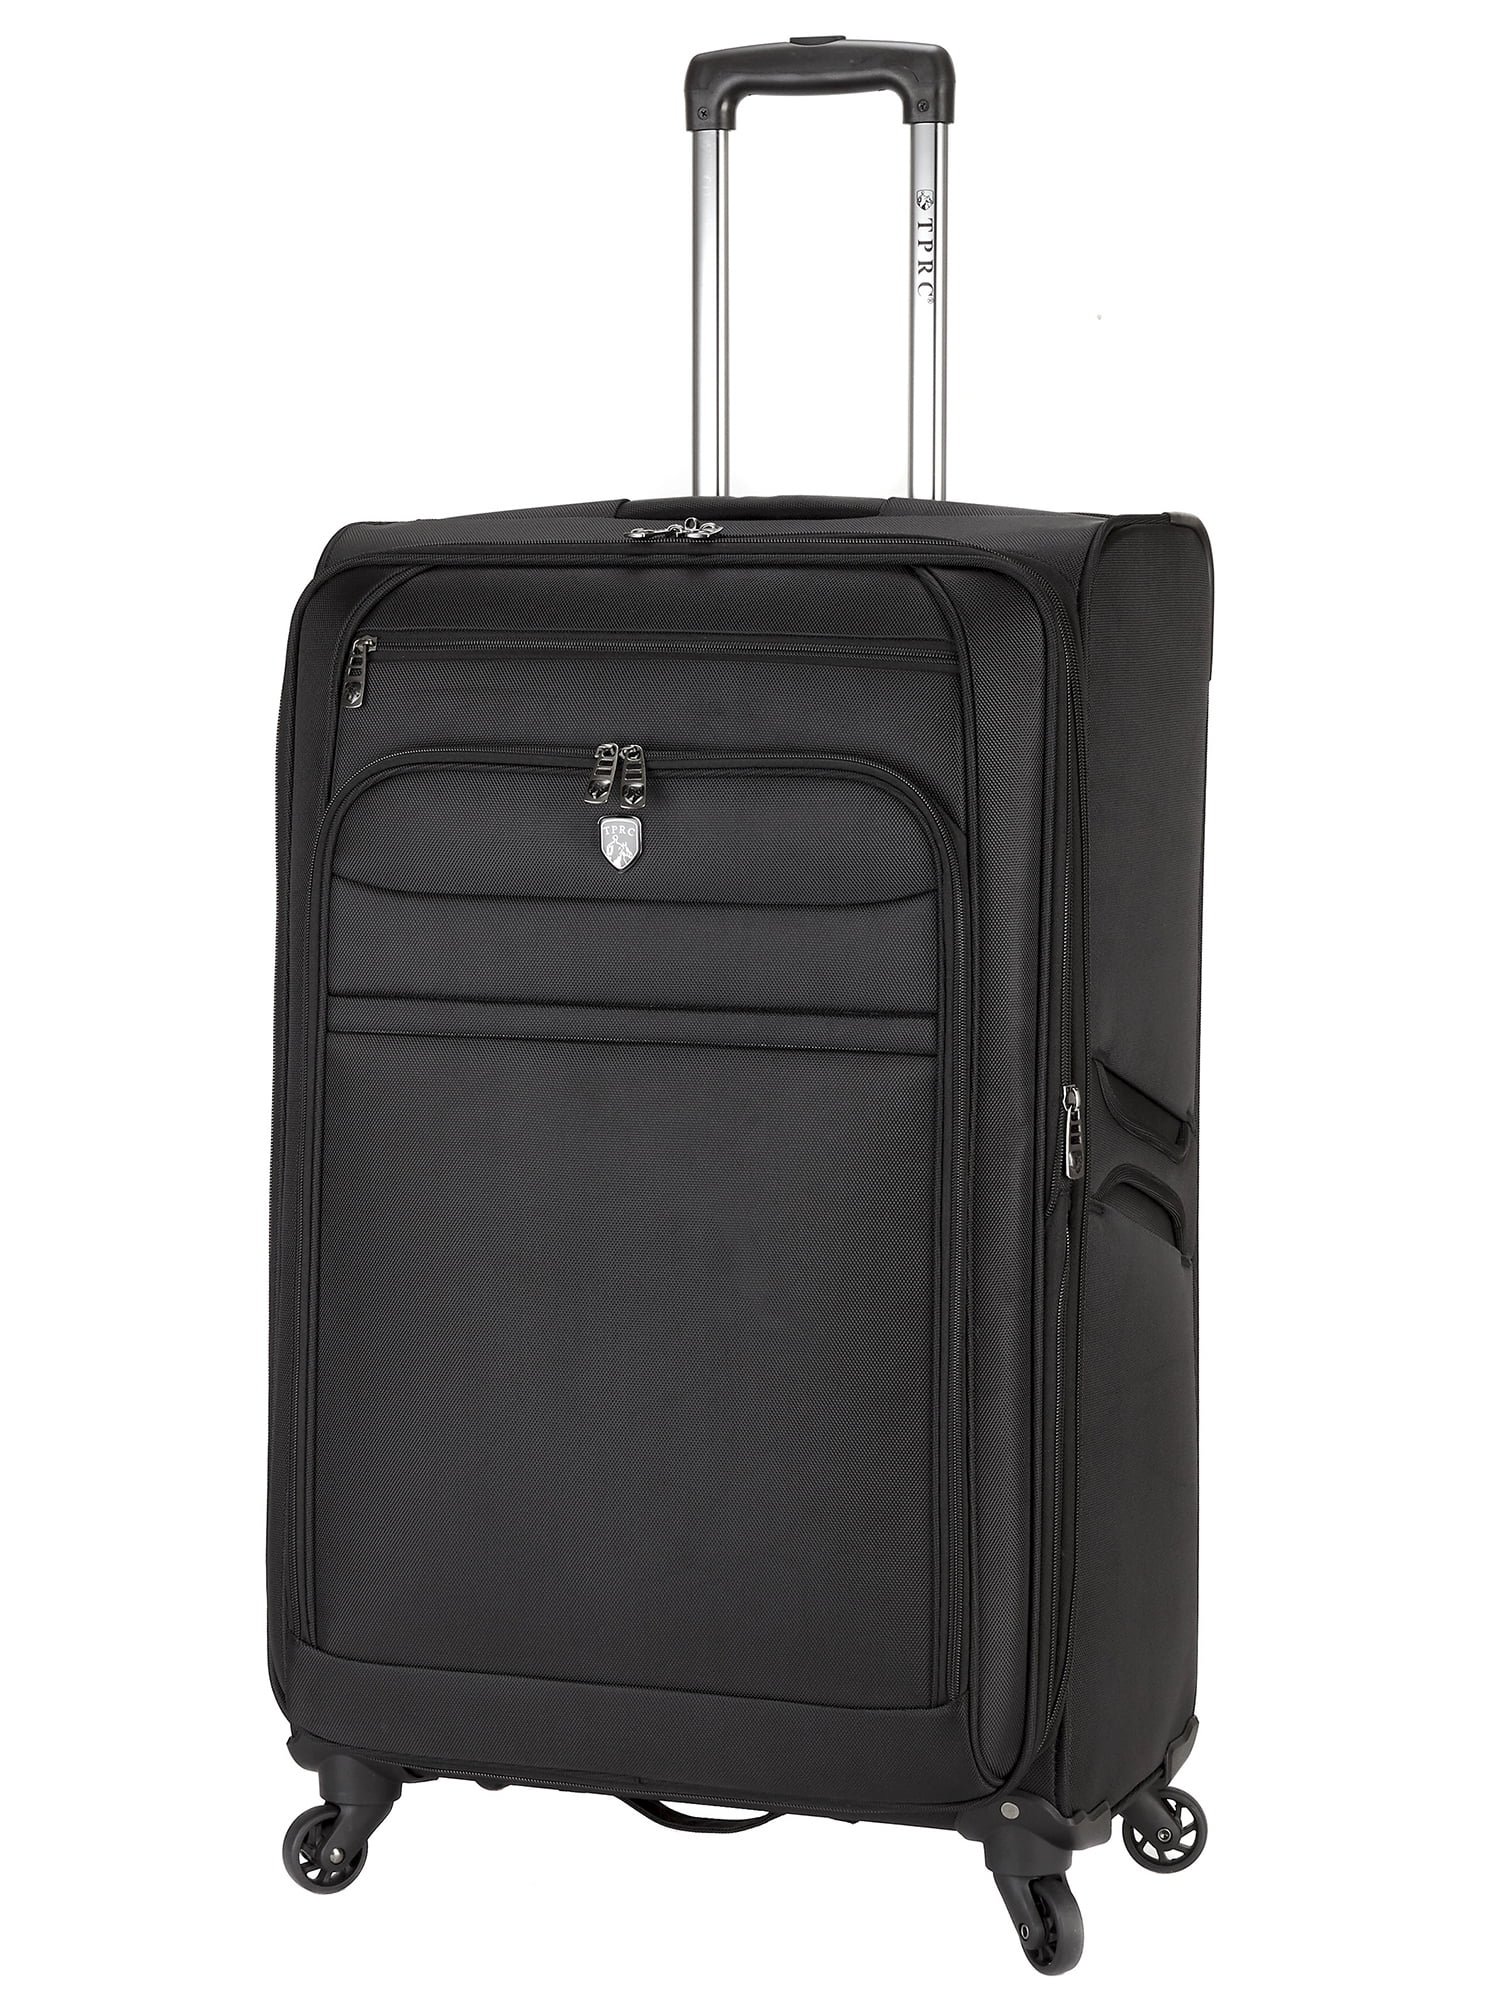 What size is 62 linear luggage?